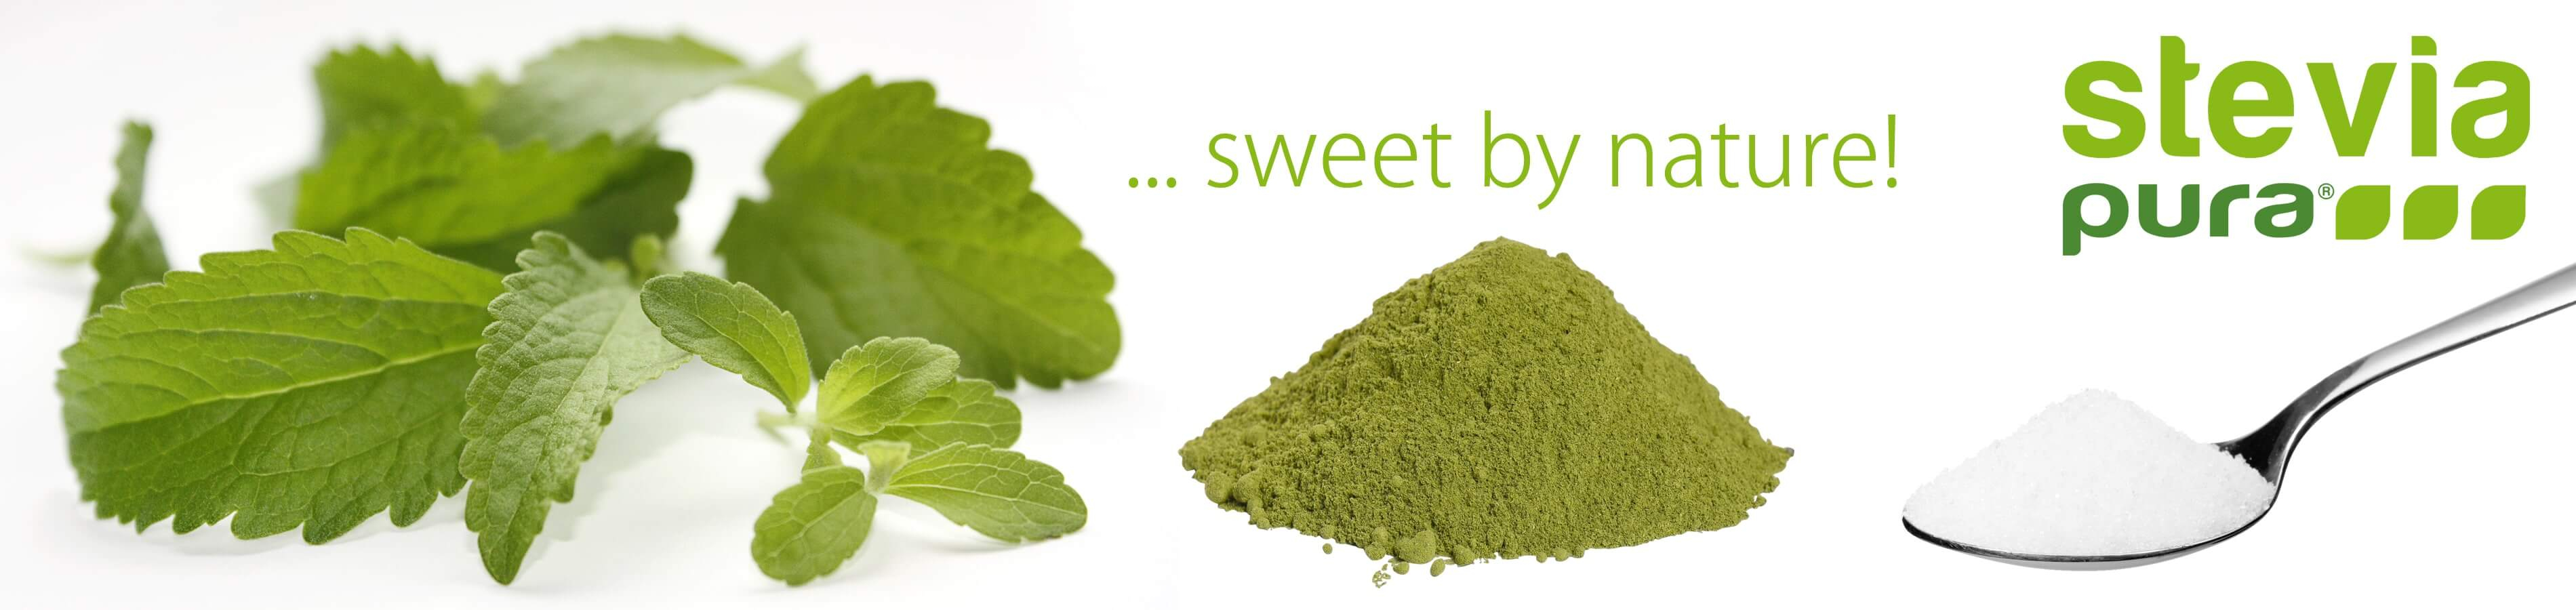 Buy Stevia | High-Quality steviapura® Sweeteners made from the Extract of the Stevia Plant.